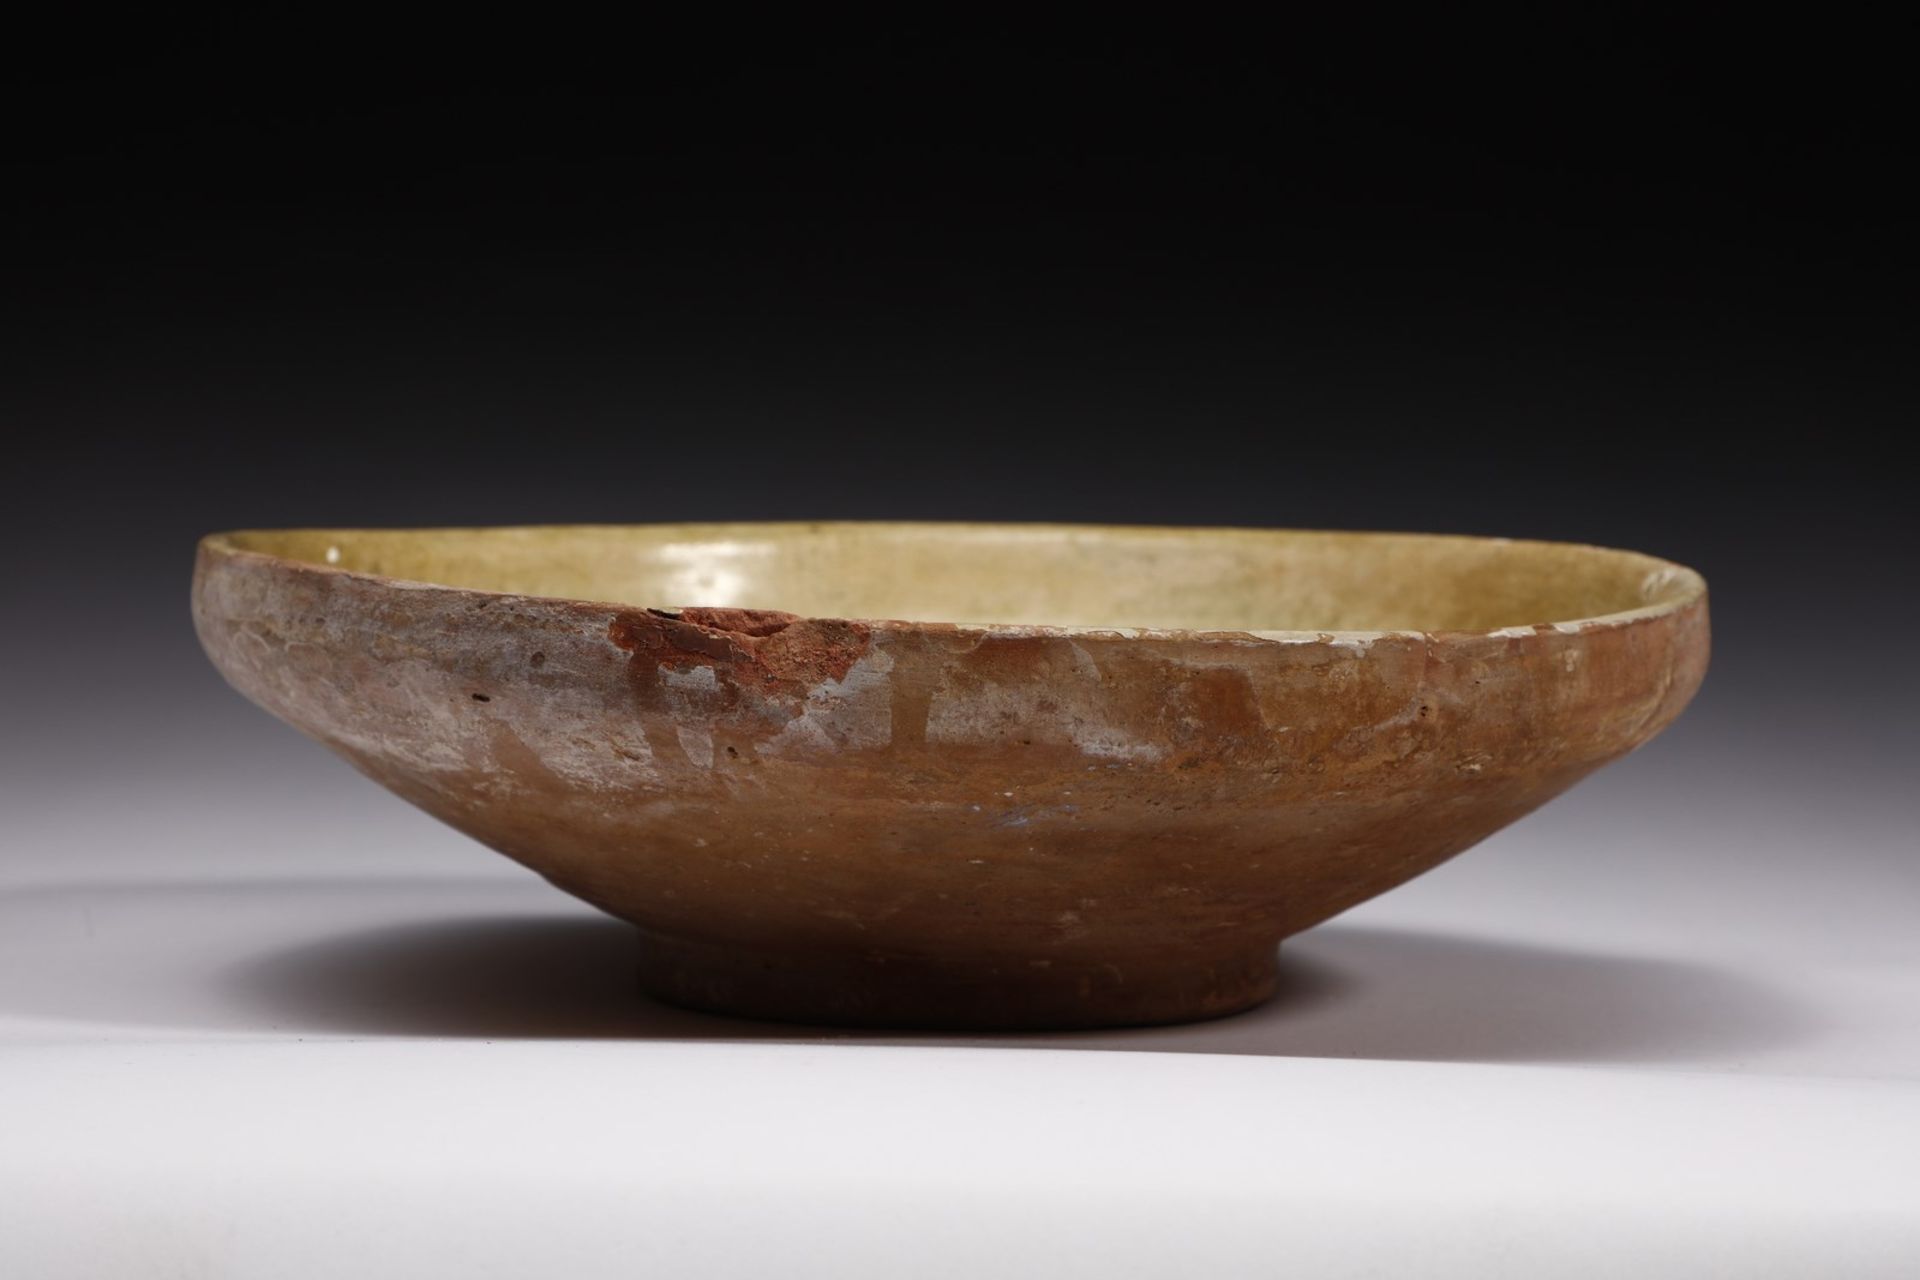 . An earthenware bowl incised with central sun Middle East or Cyprus, possibly Byzantine period .